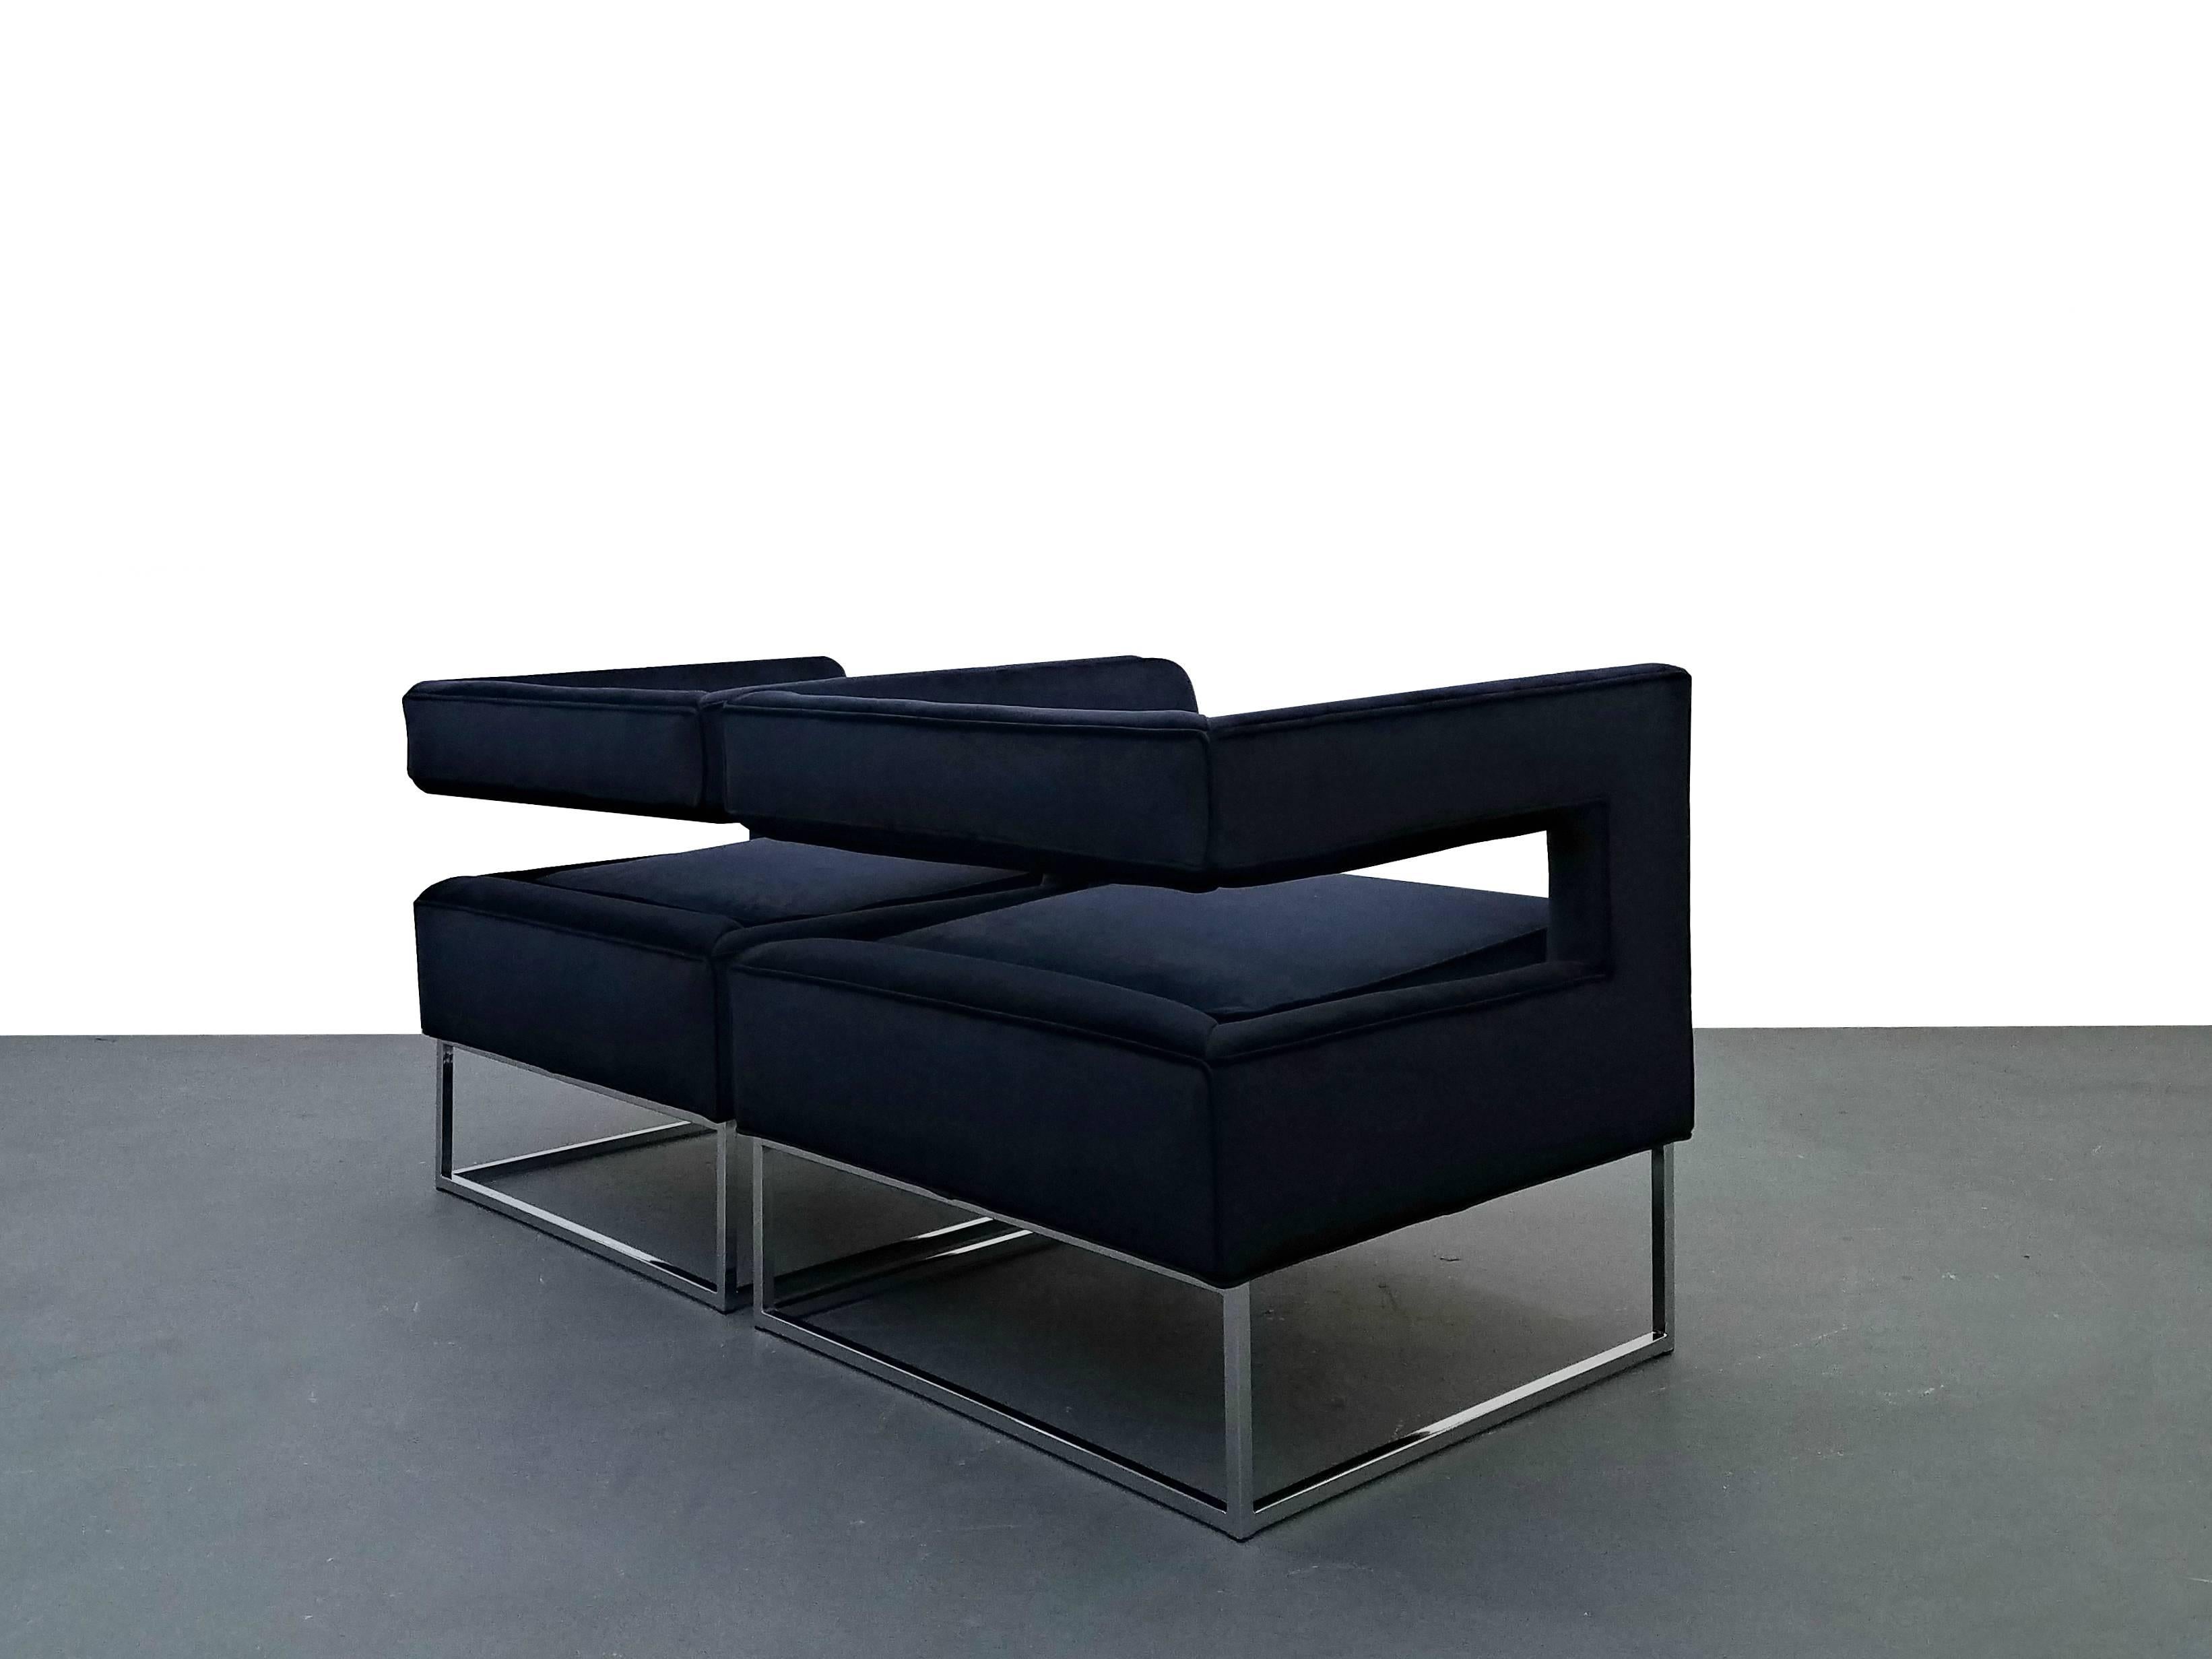 Pair of Mid-Century cube chairs made by Flair in the style of Milo Baughman for Thayer Coggin. These chairs are stunning, minimalistic beauties. 

They have been completely updated, reupholstered in a gorgeous navy blue velvet, chrome is near mint.